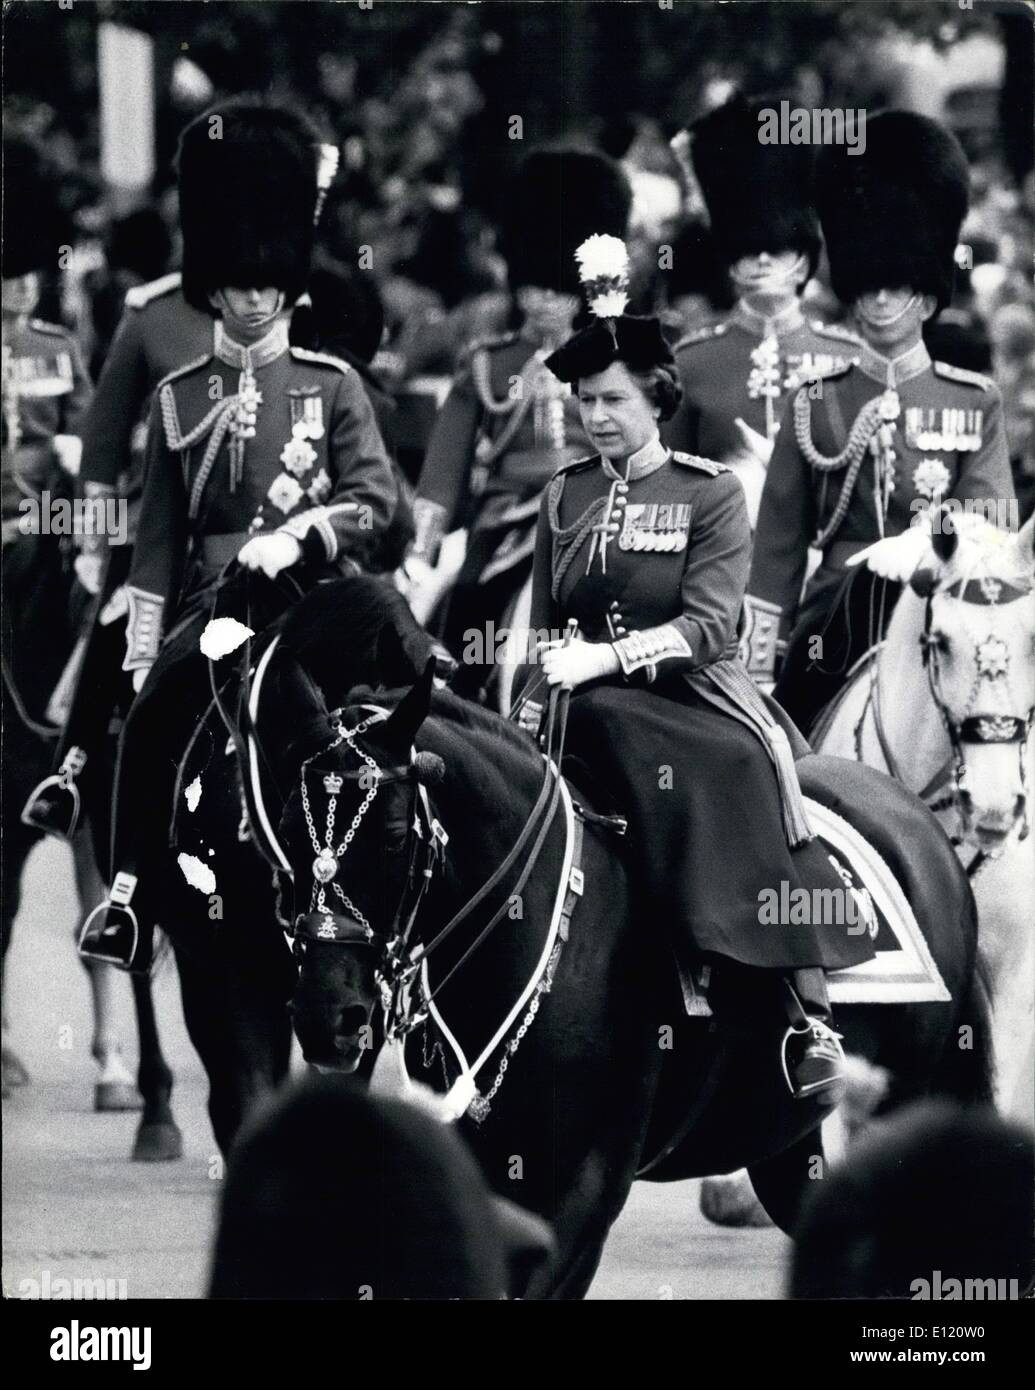 Jun. 06, 1981 - Youth fires six blank shot at the Queen during trooping ceremony: As the Queen was riding down the Mall of trooping the Colour Ceremony on Horse Guard Parade on Saturday, 17 year old Marcus Simon Sargeant fired six blank shot at her from a relpica pistol, making her horse Burmese bolt for a few yards before the she got it under control she then carried on for the trooping ceremony. Sargeant was arrested and appeared at Bow Street Court today charged under Section two of the Treason Act. 142 Stock Photo